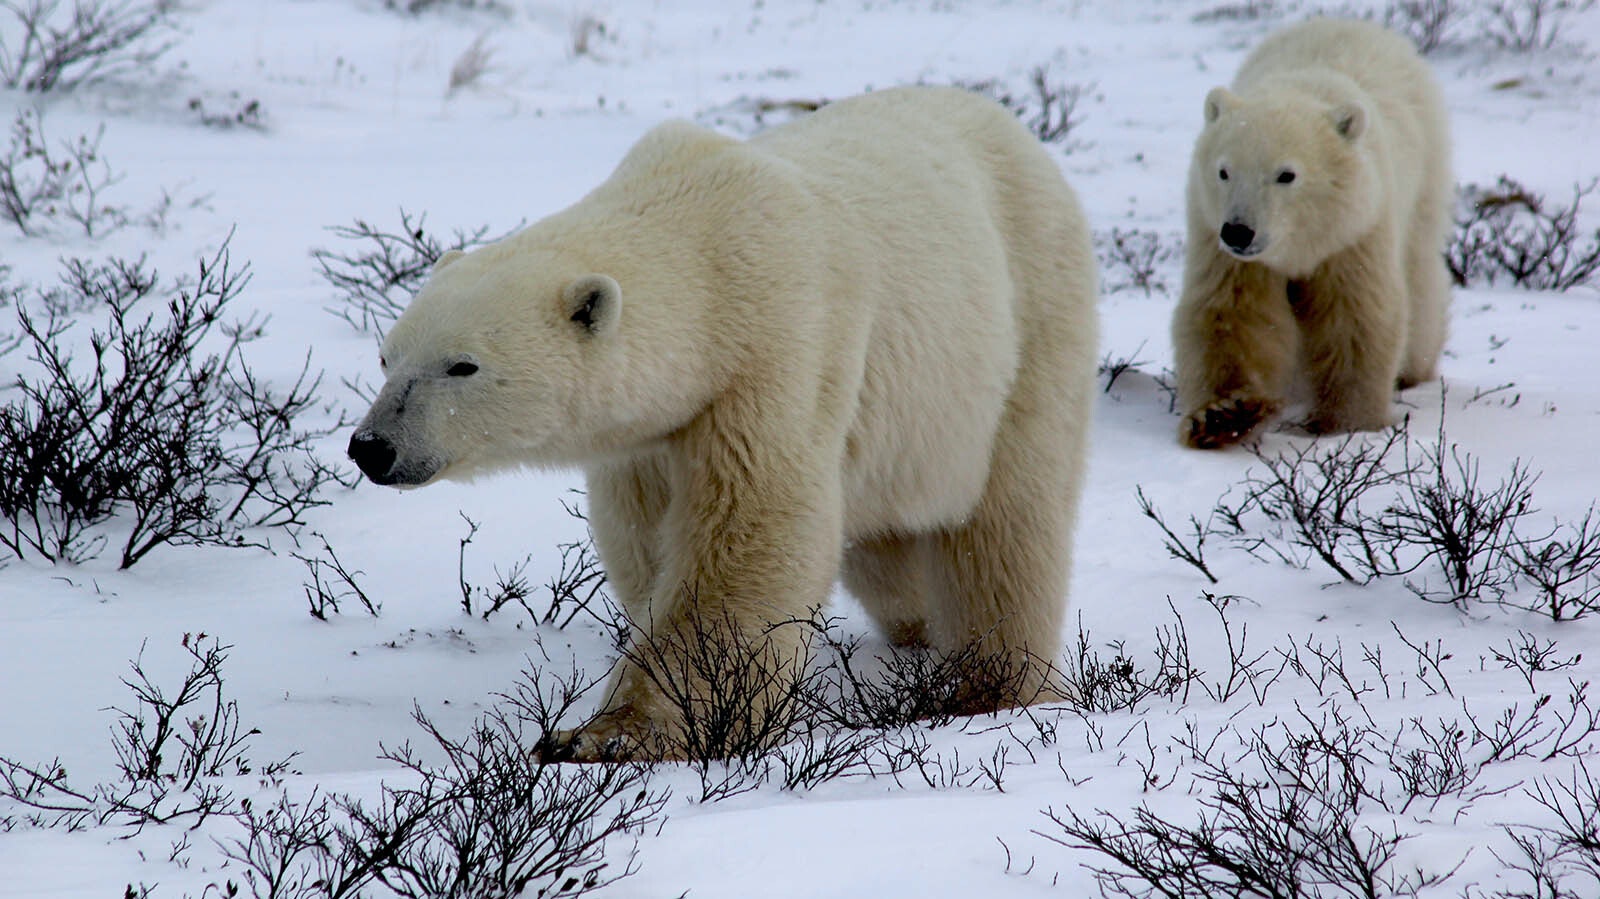 Polar bears living on the edge of Hudson Bay east of Churchill, Manitoba, Canada, have become accustomed to people watching them around.